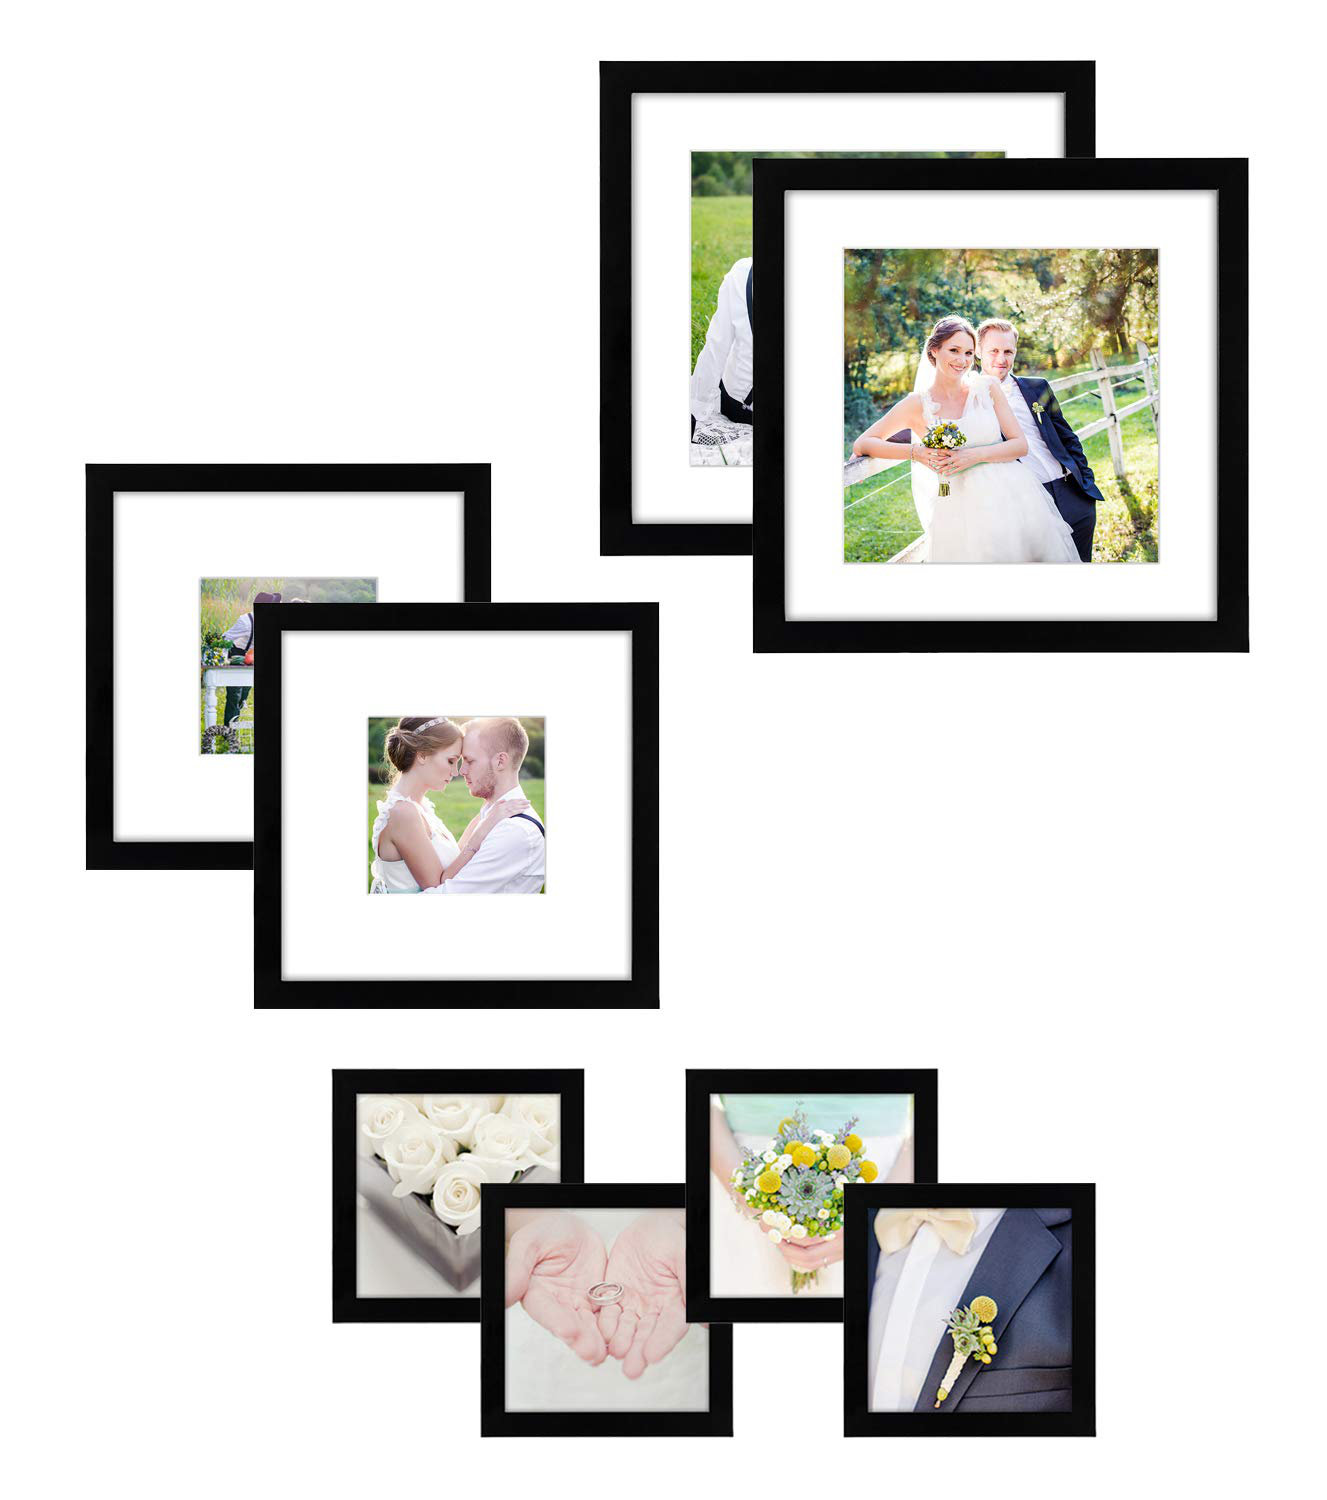 Bless international Picture Frame Set, 8 Pieces with Two 11x11